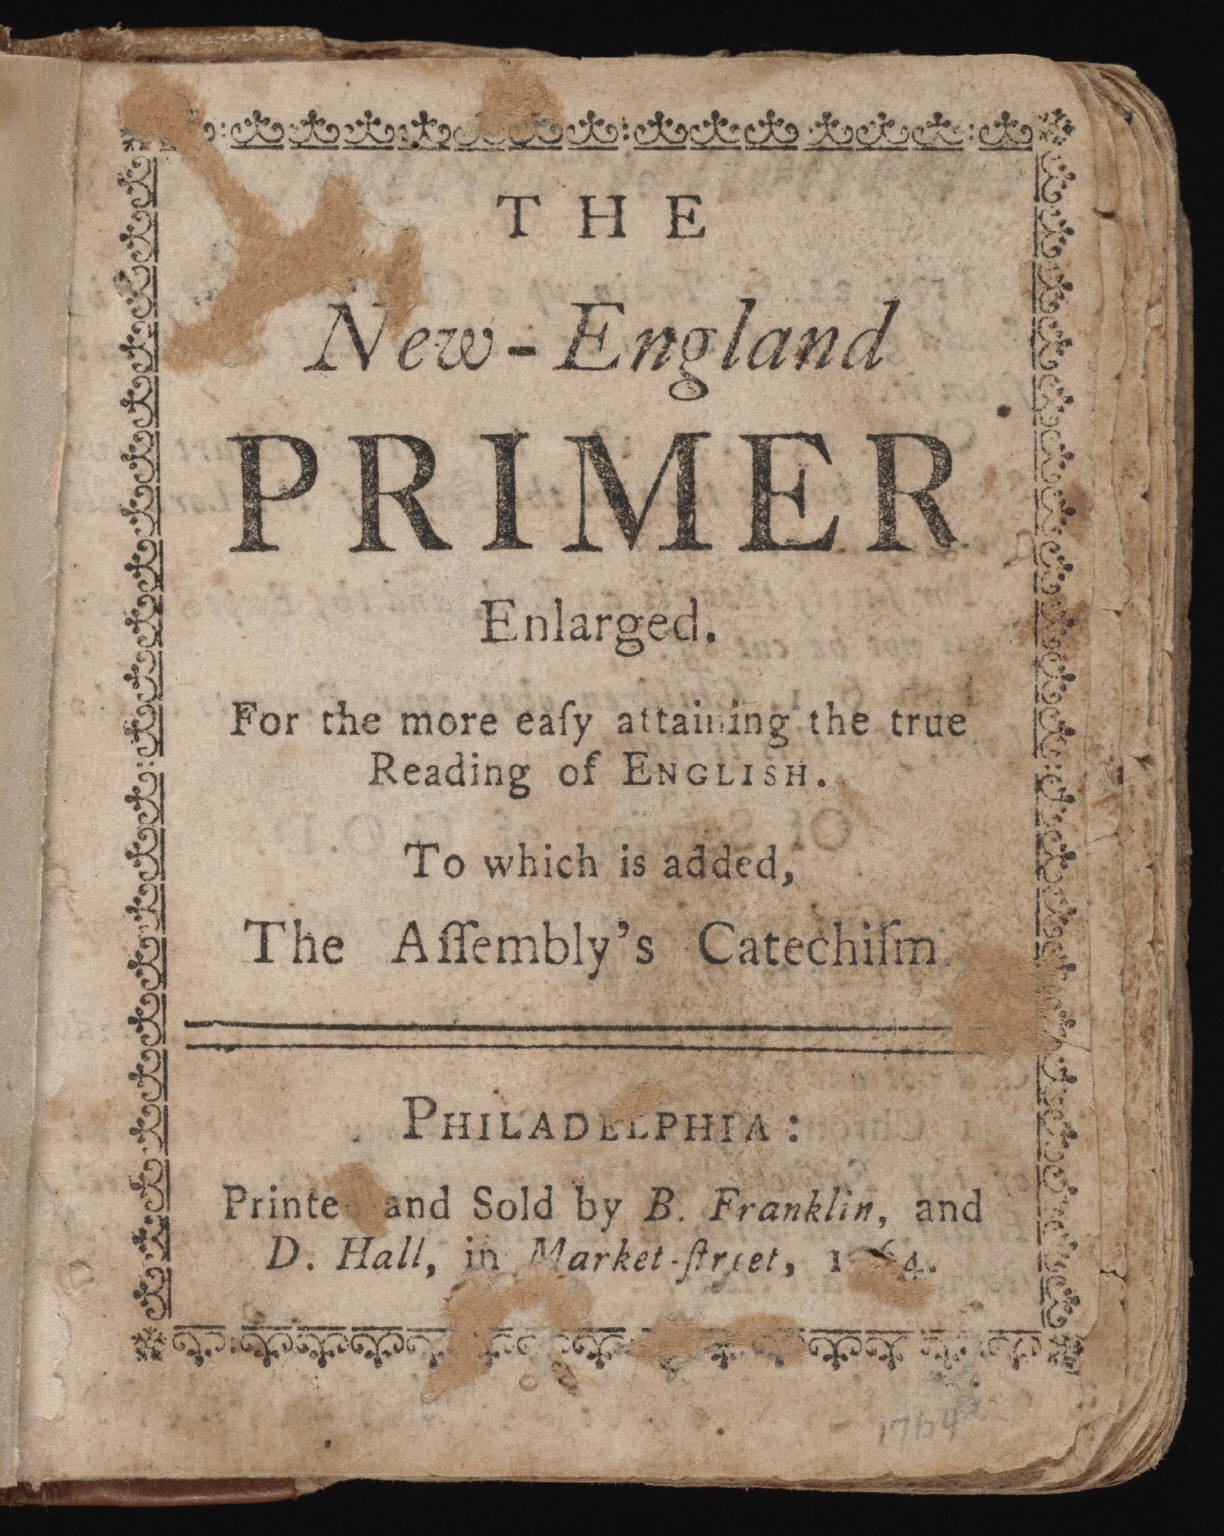 New-England_Primer_Enlarged_printed_and_sold_by_Benjamin_Franklin